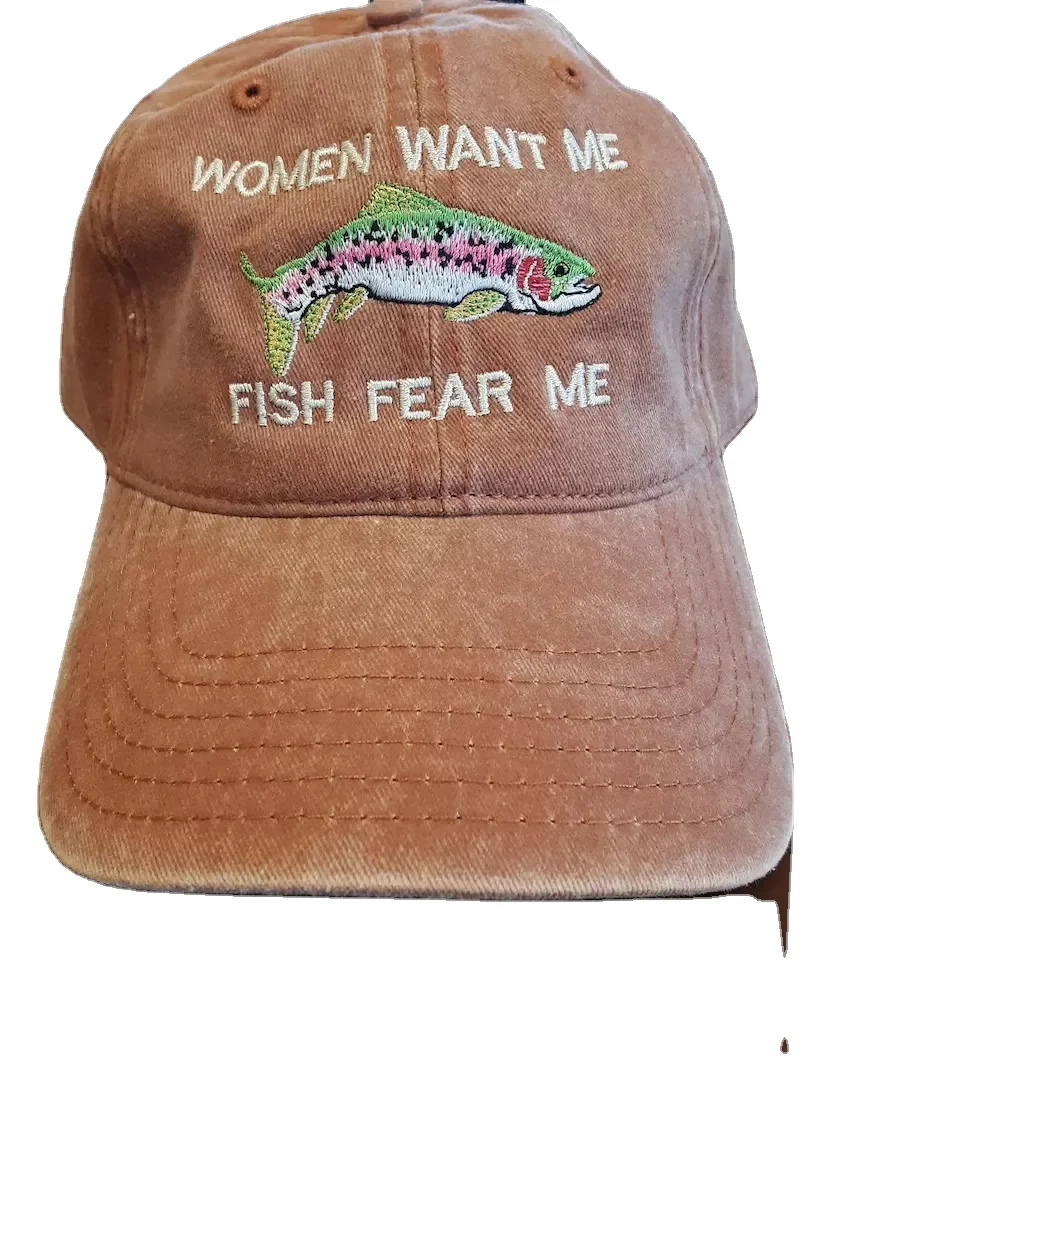 Fish Want Me - Men Fear Me (Embroidered Vintage Cotton Twill